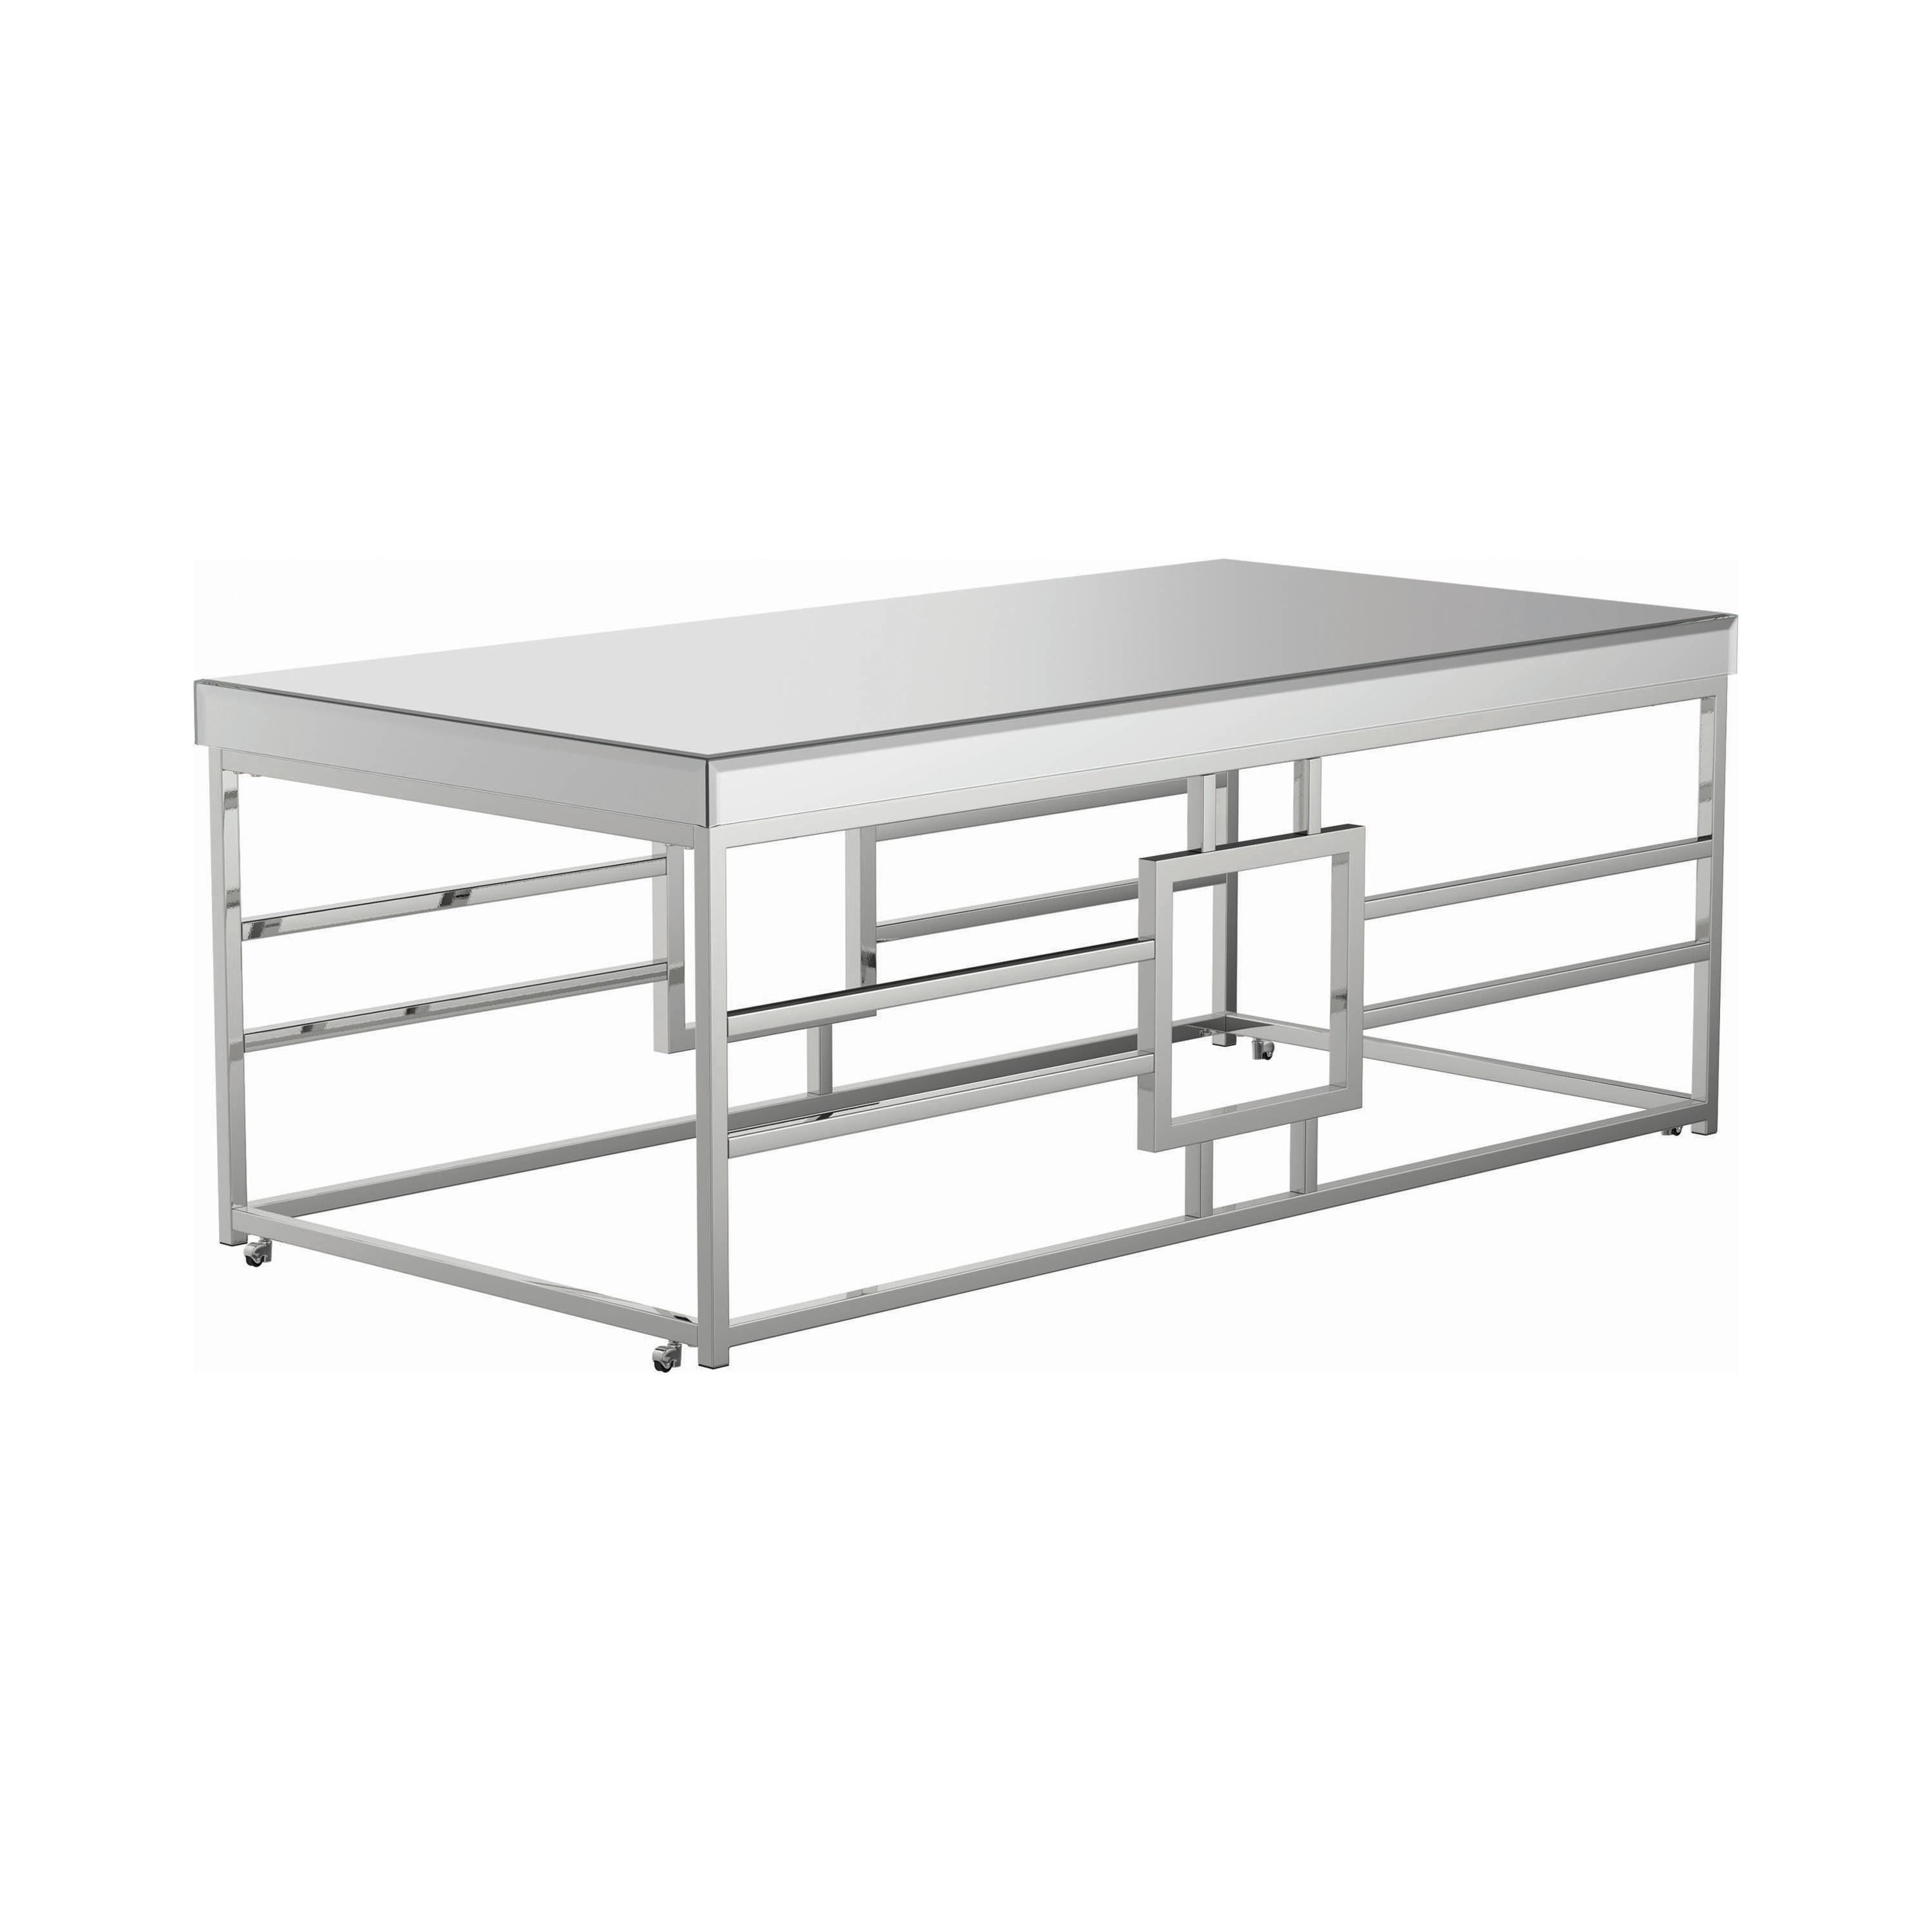 Contemporary Coffee Table 723078 723078 in Chrome 